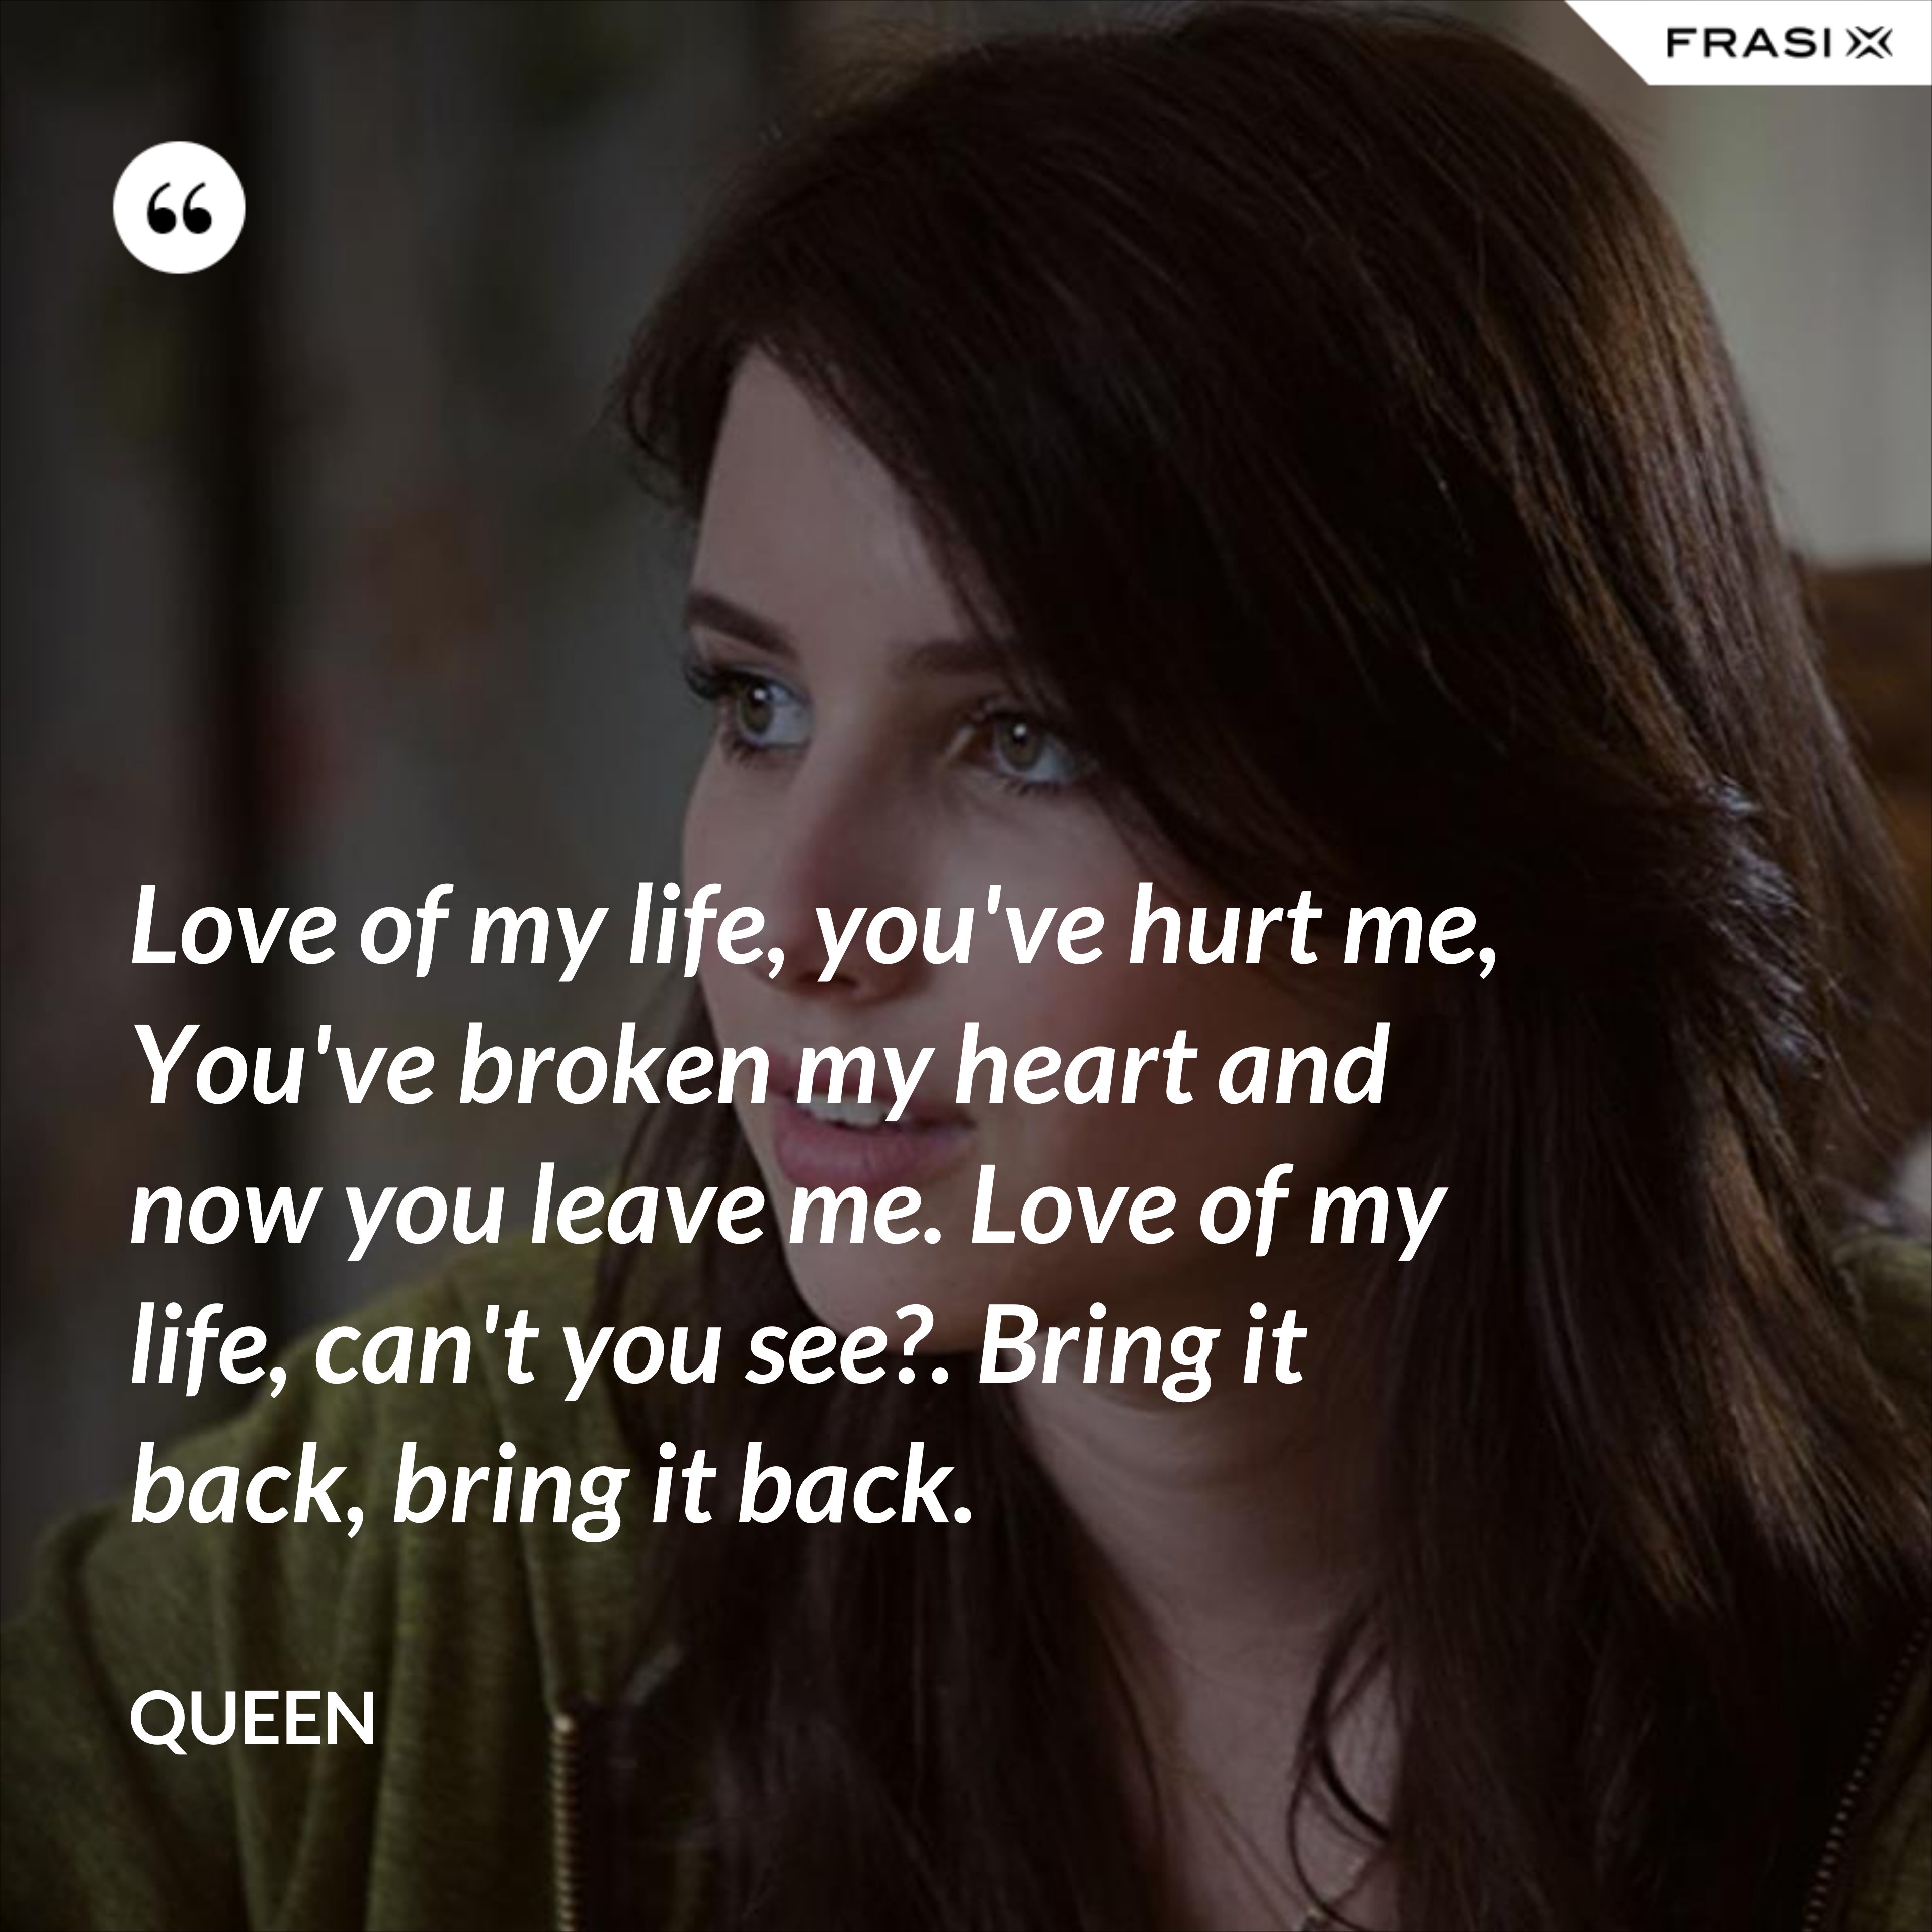 Love of my life, you've hurt me, You've broken my heart and now you leave me. Love of my life, can't you see?. Bring it back, bring it back. - Queen